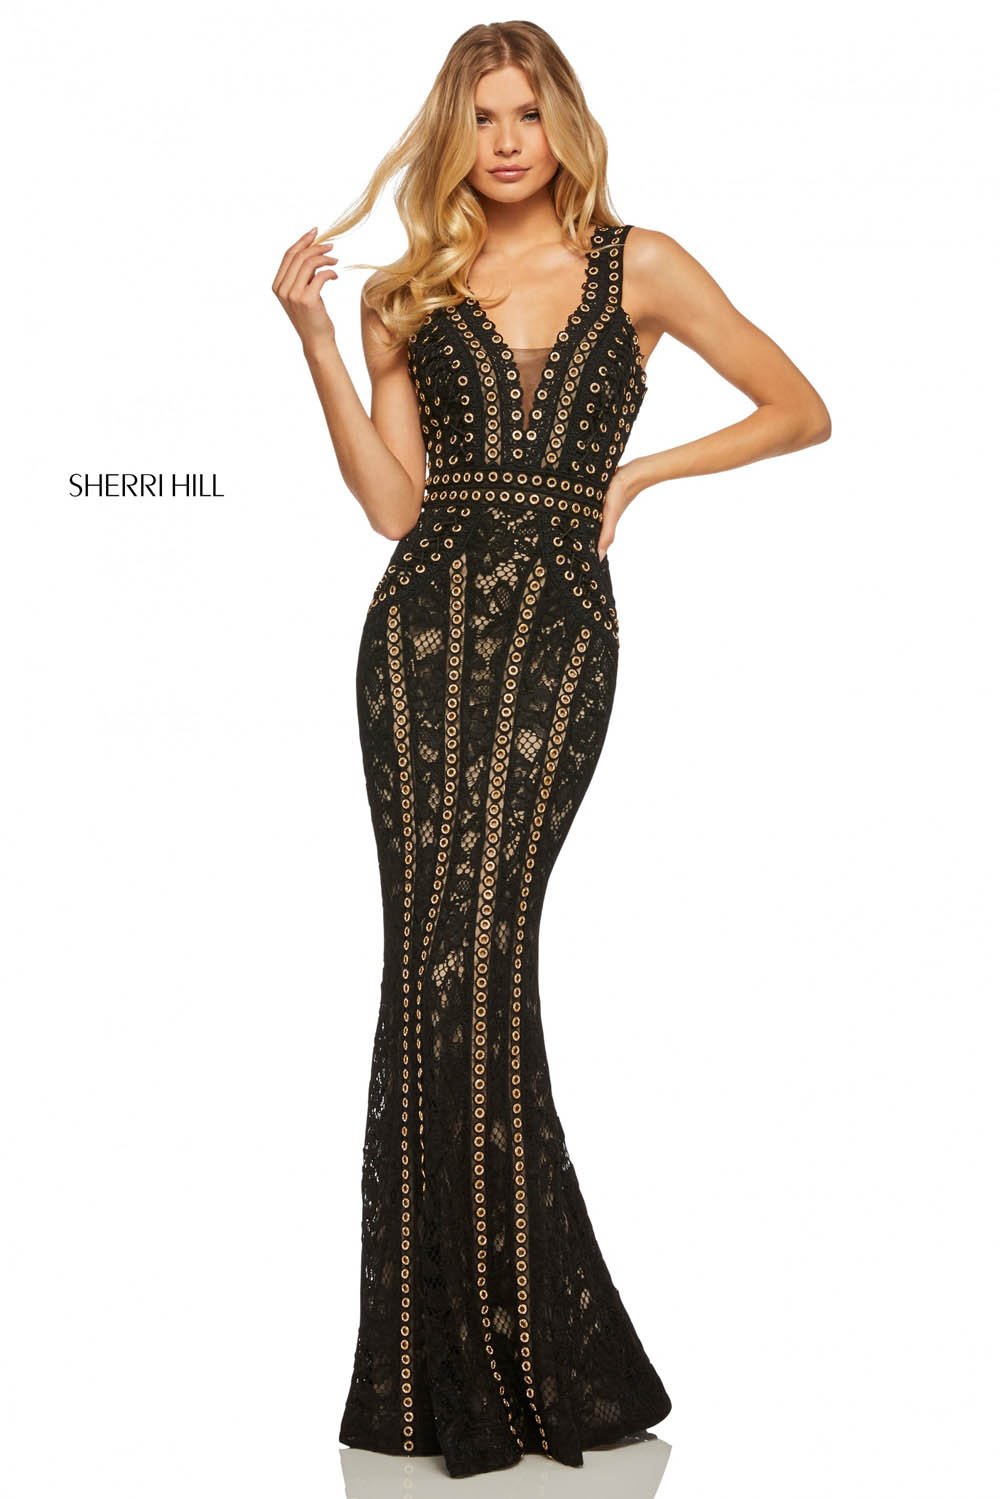 Sherri Hill 52611 dress images in these colors: Ivory Nude, Black.